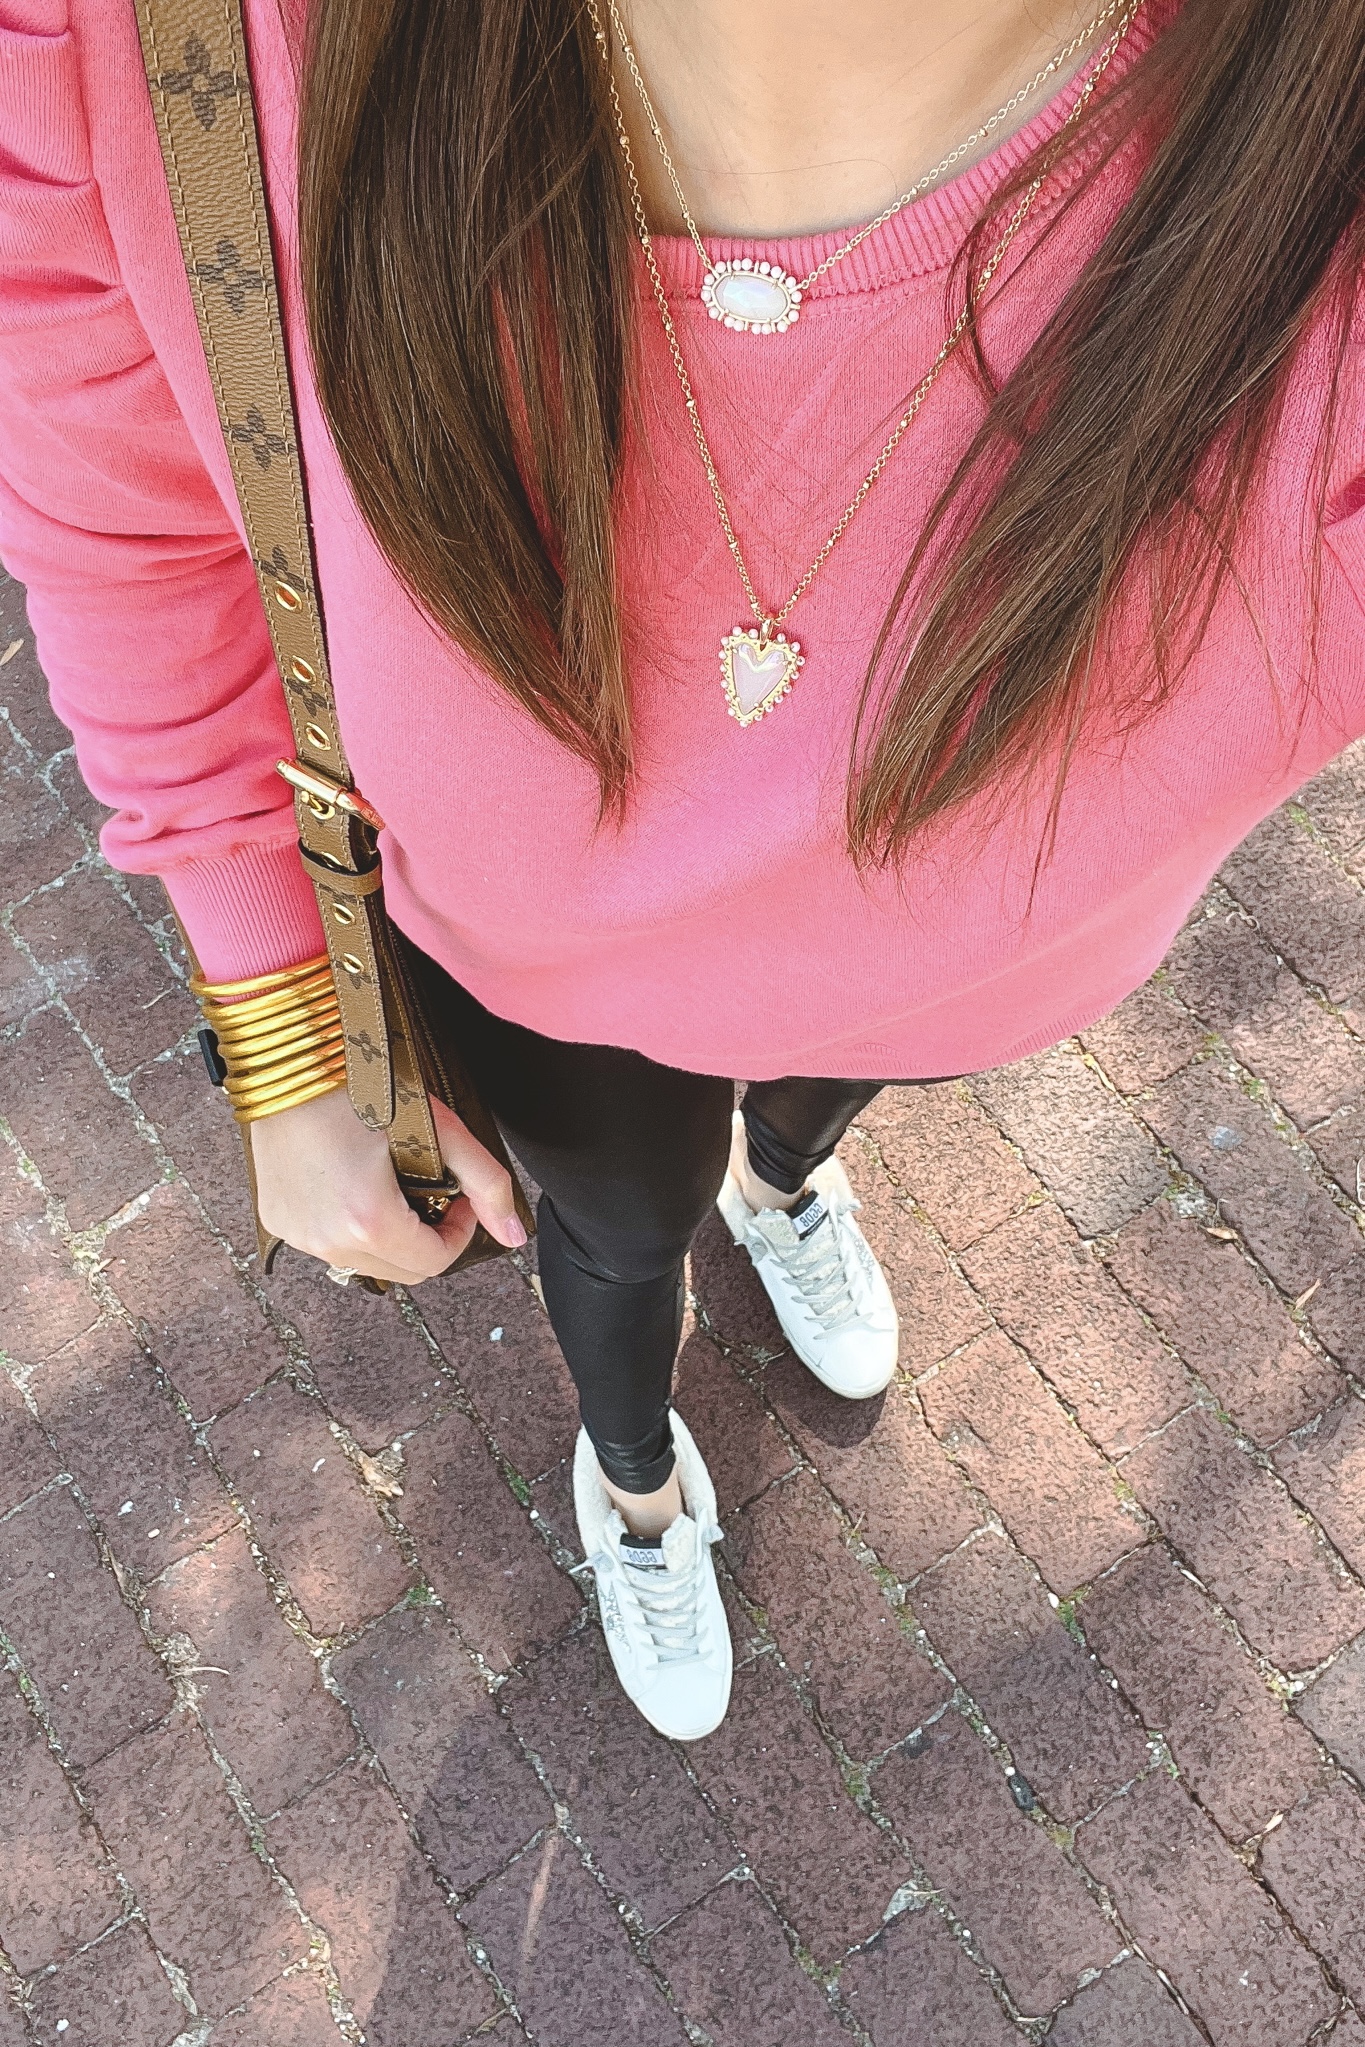 kendra scott layered heart necklaces with pink sweatshirt and faux leather leggings